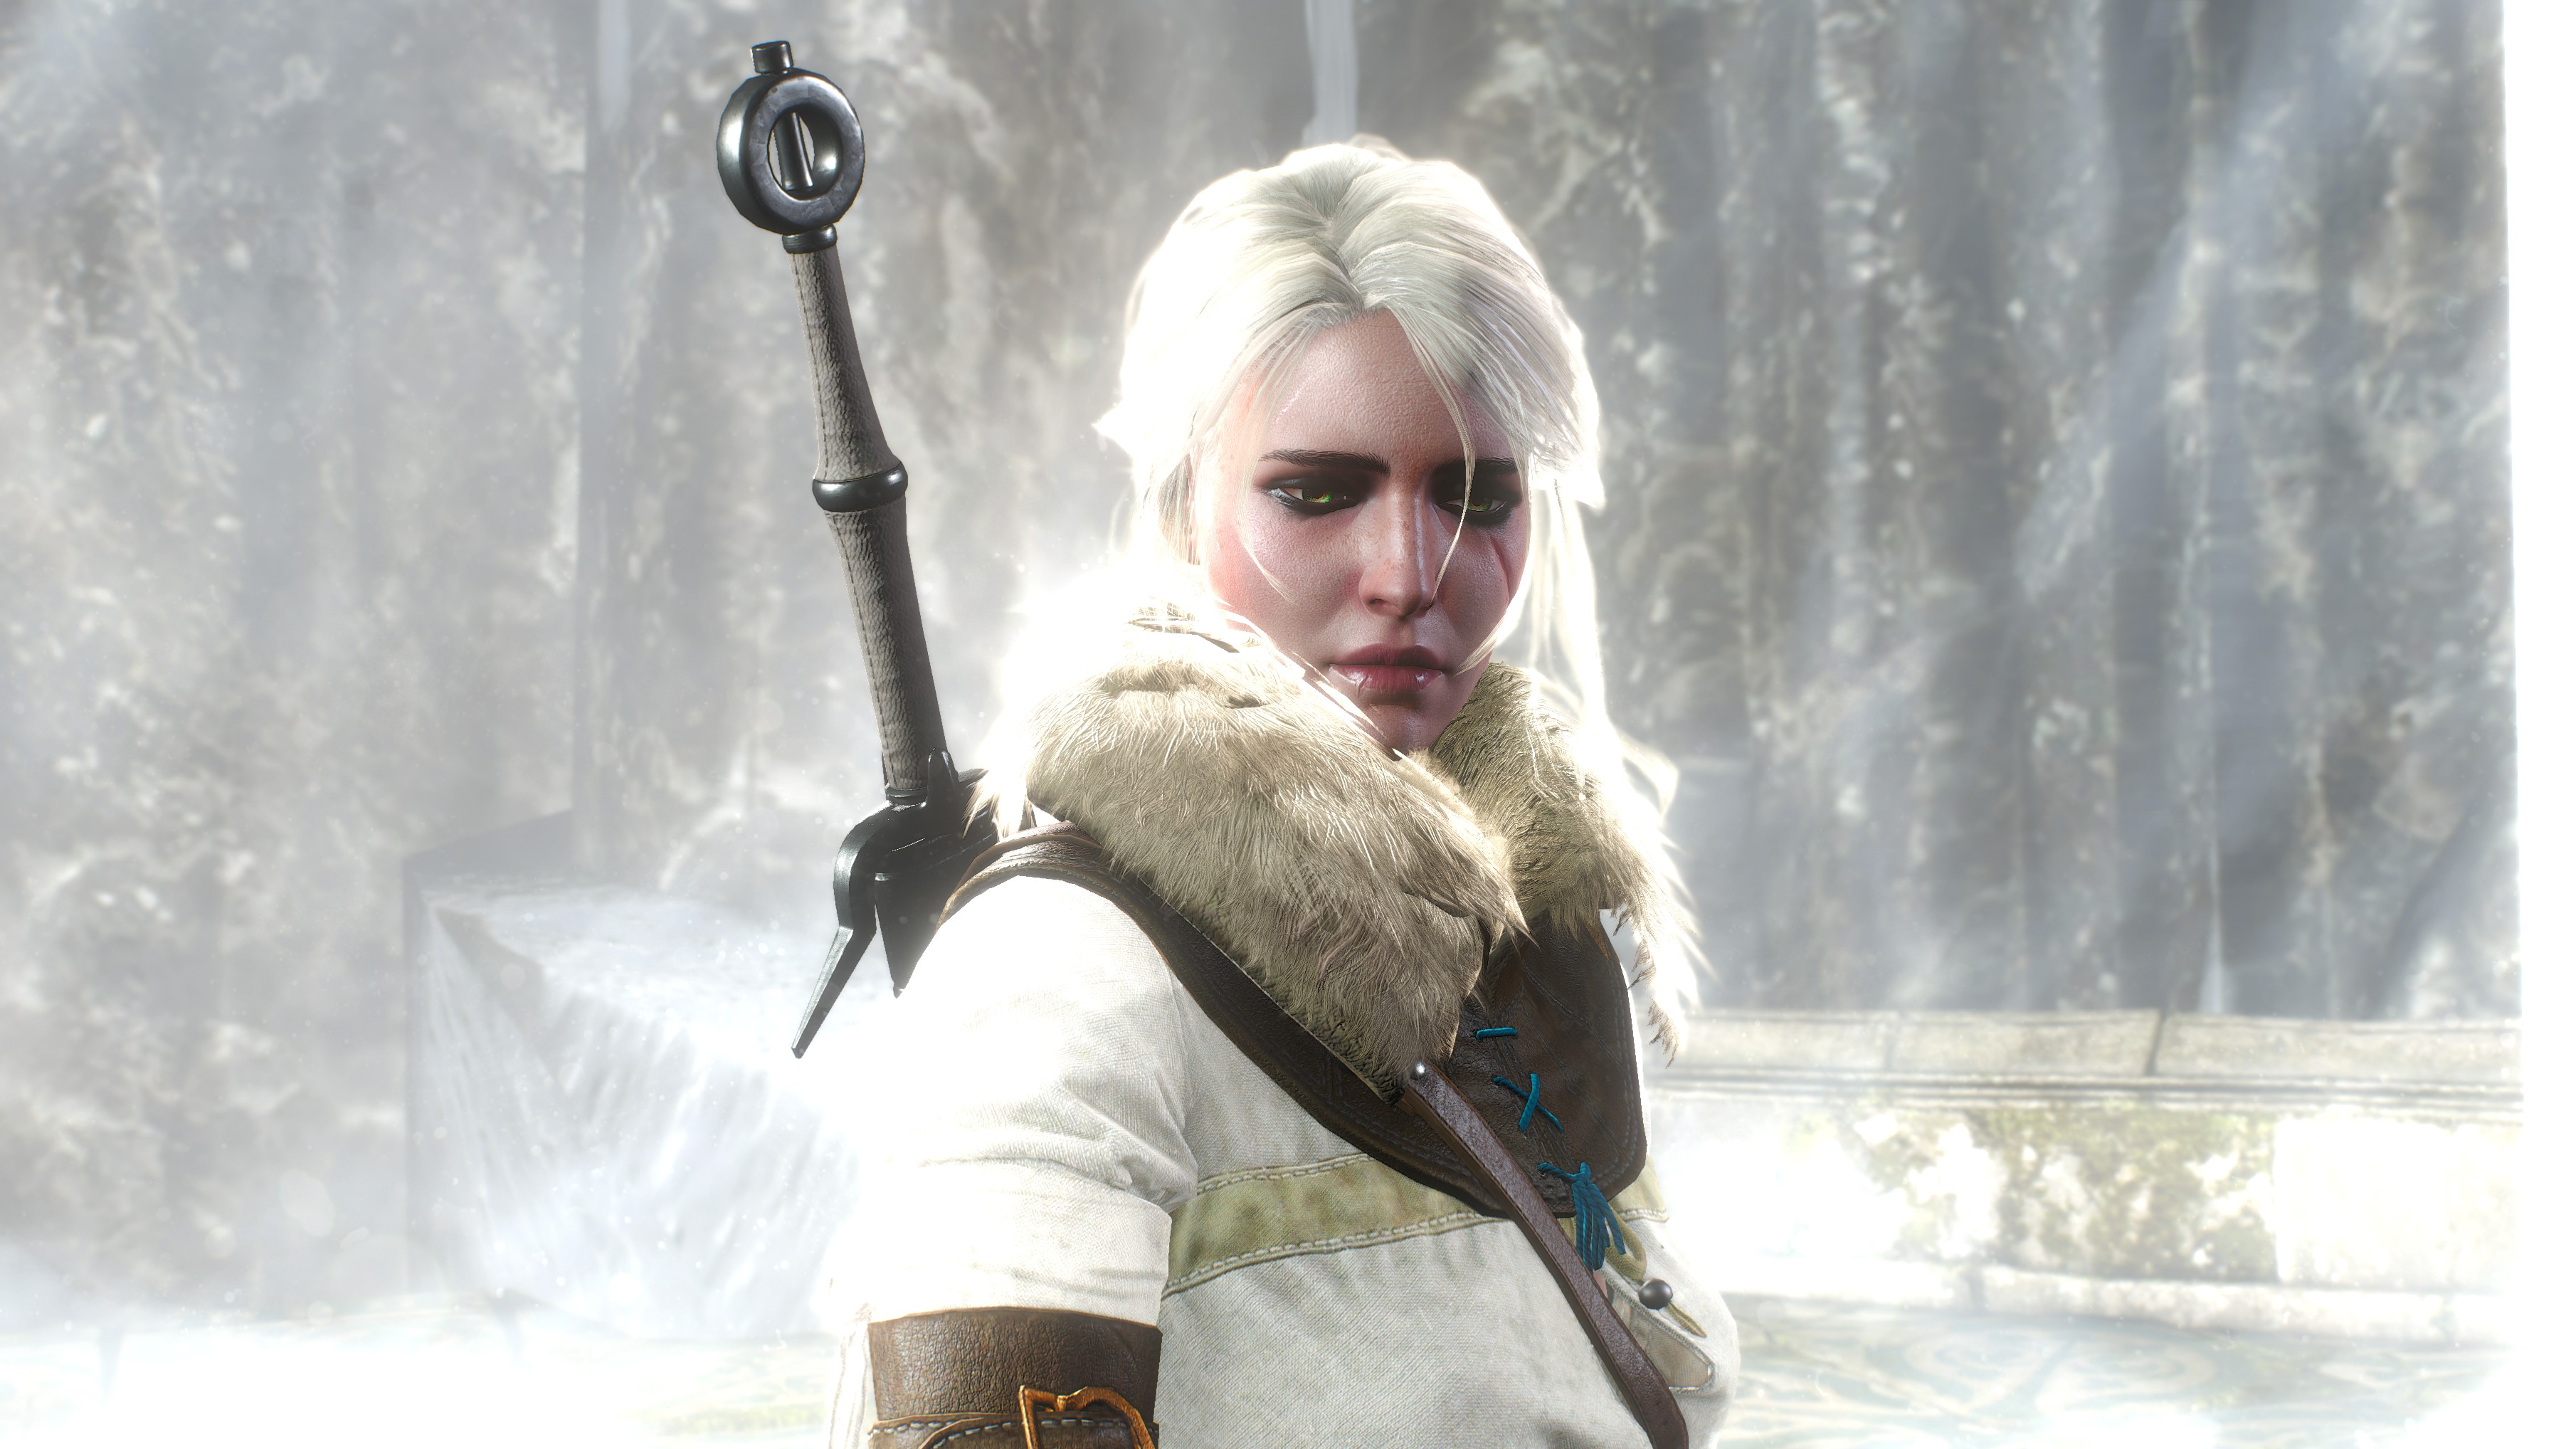 General 3620x2036 The Witcher 3: Wild Hunt Cirilla Fiona Elen Riannon women face video games PC gaming video game girls fantasy girl video game characters